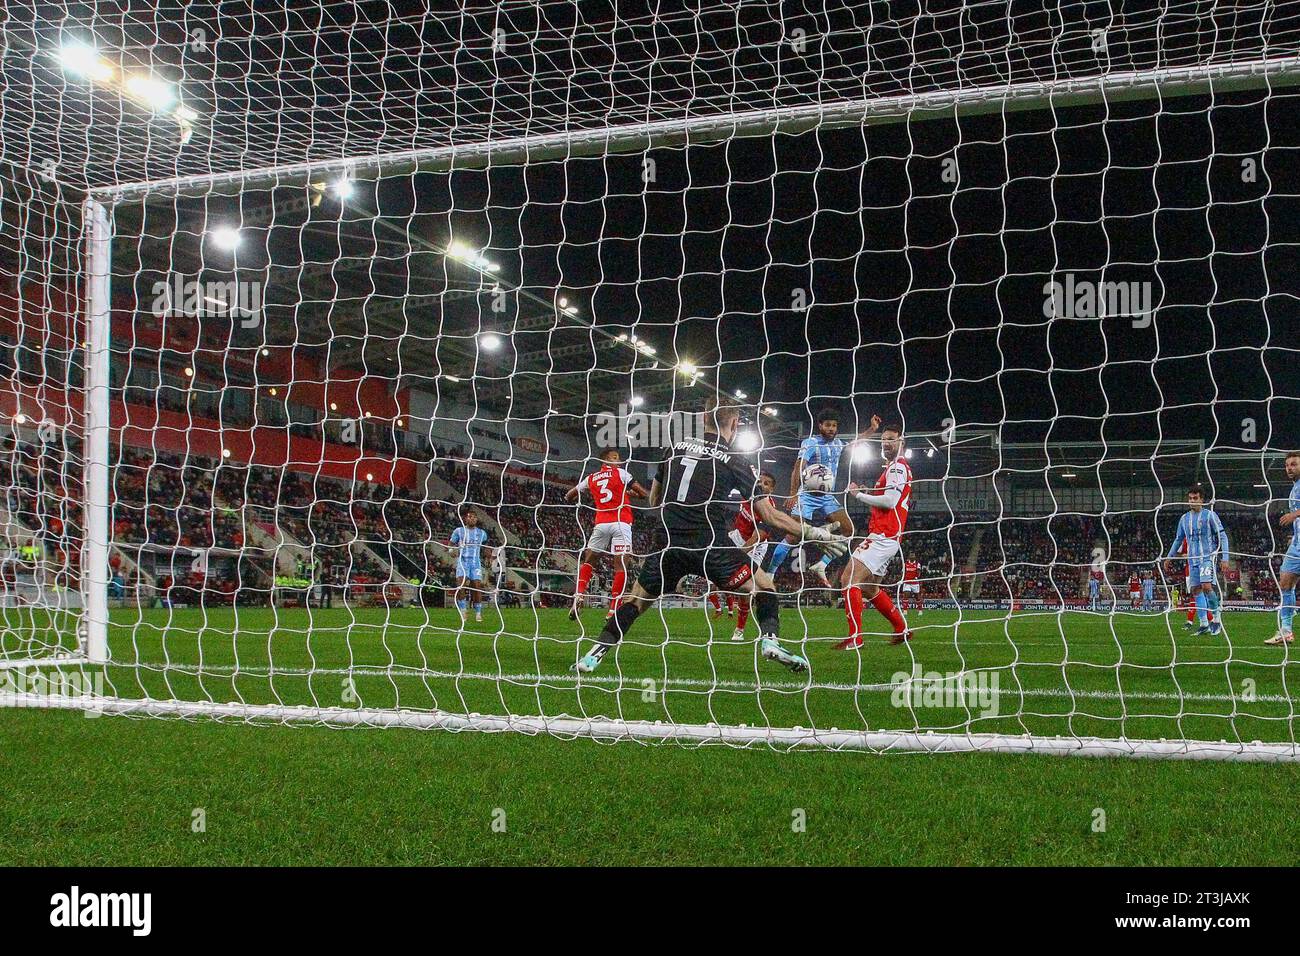 Rotherham, UK, 25/10/2023, AESSEAL New York Stadium, Rotherham, England - 25th October 2023 Ellis Simms (9) of Coventry City has his header saved by Viktor Johansson Goalkeeper of Rotherham United - during the game Rotherham United v Coventry City, Sky Bet Championship,  2023/24, AESSEAL New York Stadium, Rotherham, England - 25th October 2023 Credit: Arthur Haigh/WhiteRosePhotos/Alamy Live News Stock Photo